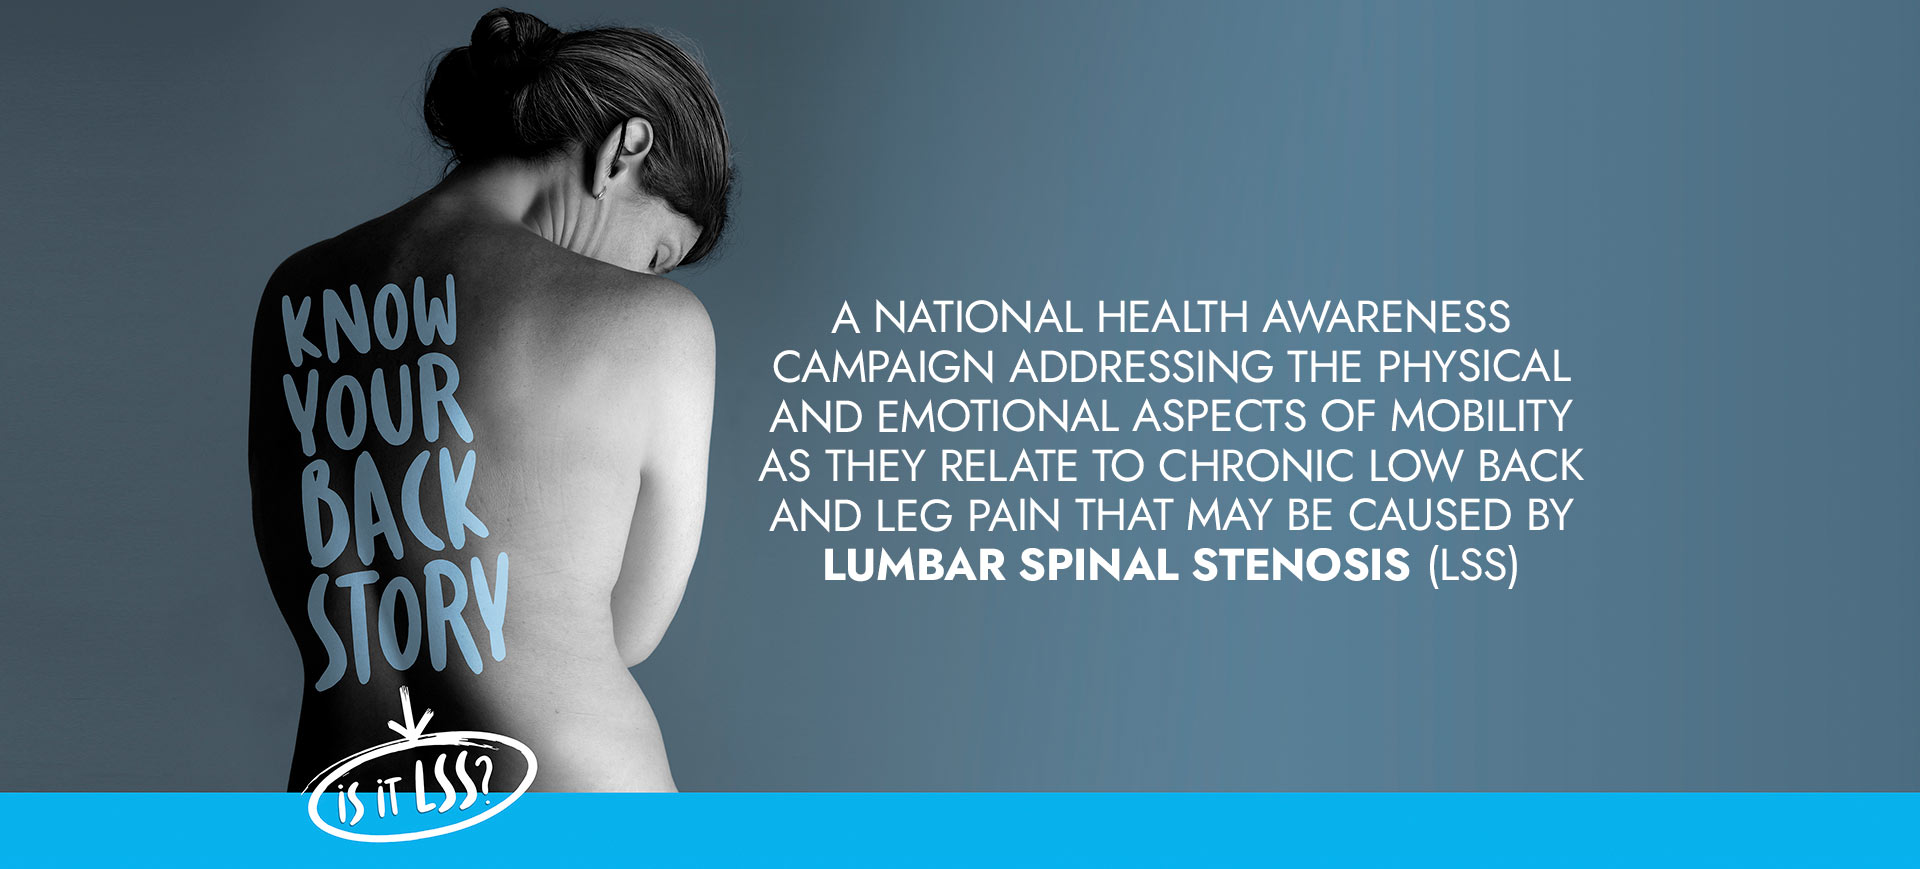 Image: Woman with her back shown. Text: Know Your Back Story, Is it LSS? A national health awareness campaign addressing the physical and emotional aspects of mobility as they relate to chronic low back and leg pain that may be caused by lumbar spinal stenosis (LSS).